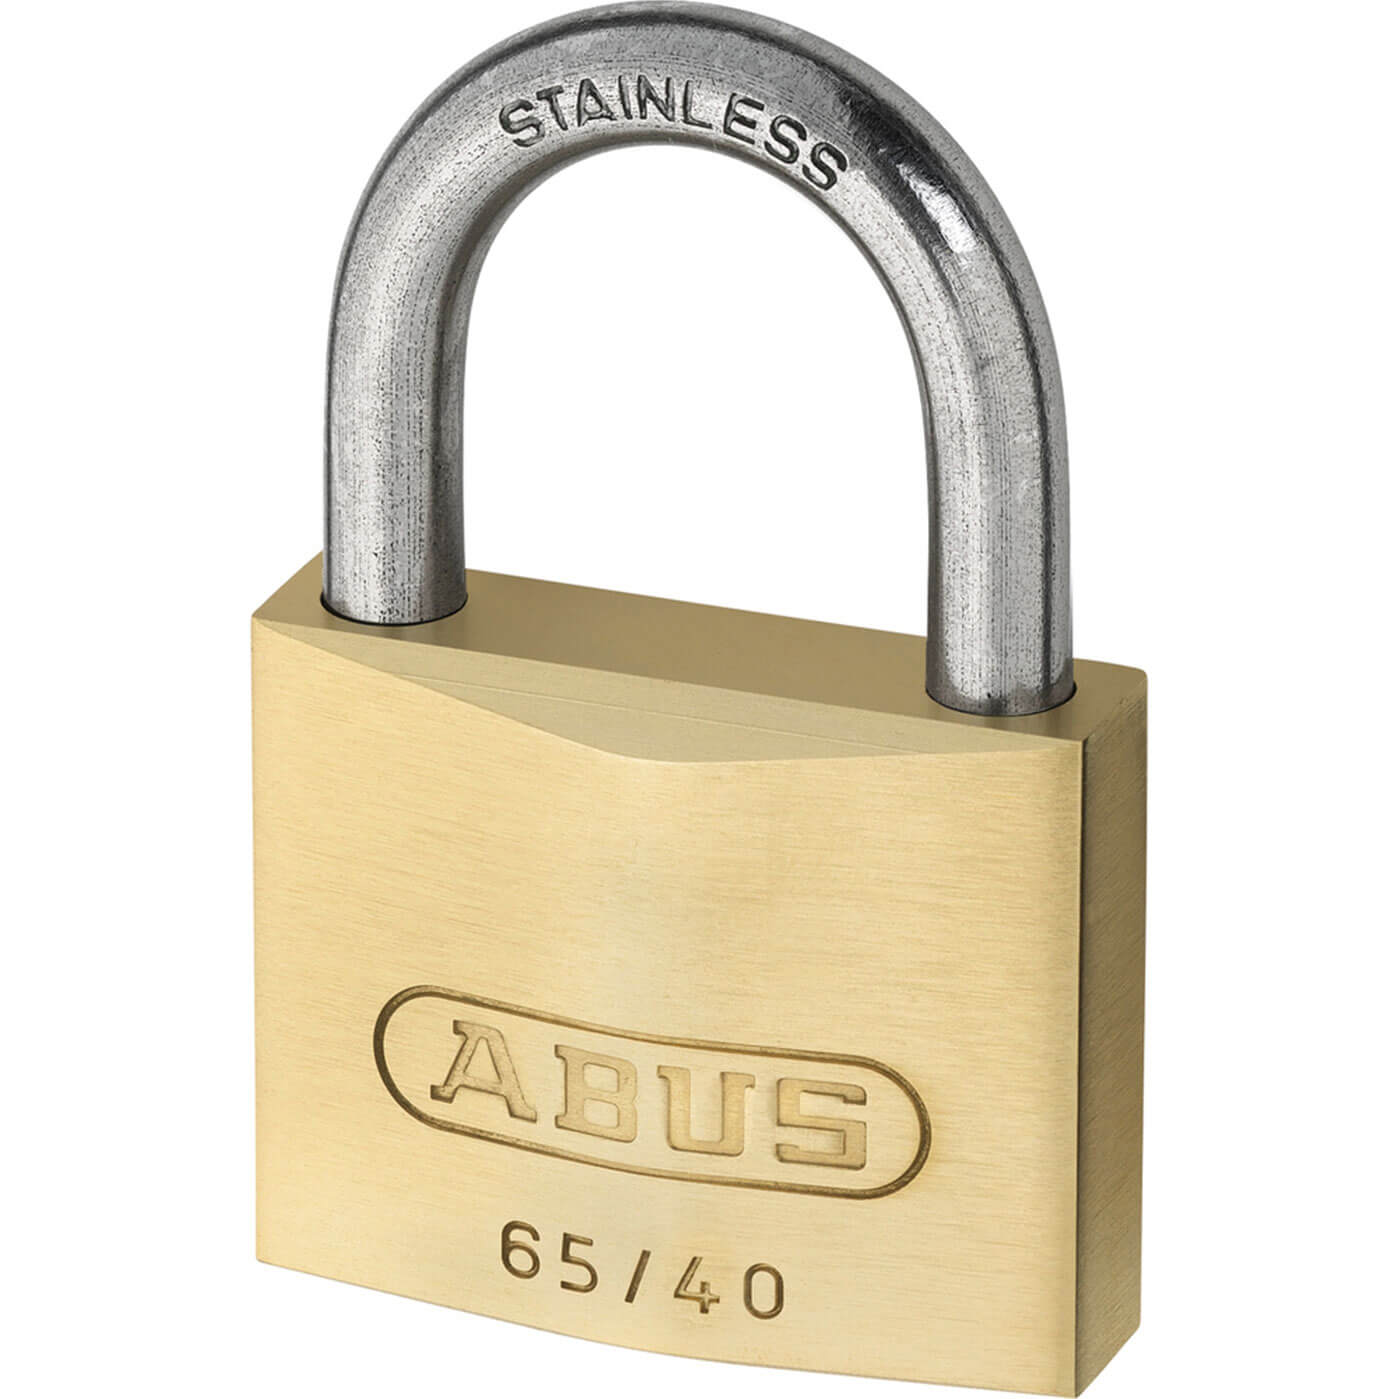 Image of Abus 40mm 65 Series Compact Brass Padlock With Stainless Steel Shackle Pack of 2 Keyed Alike